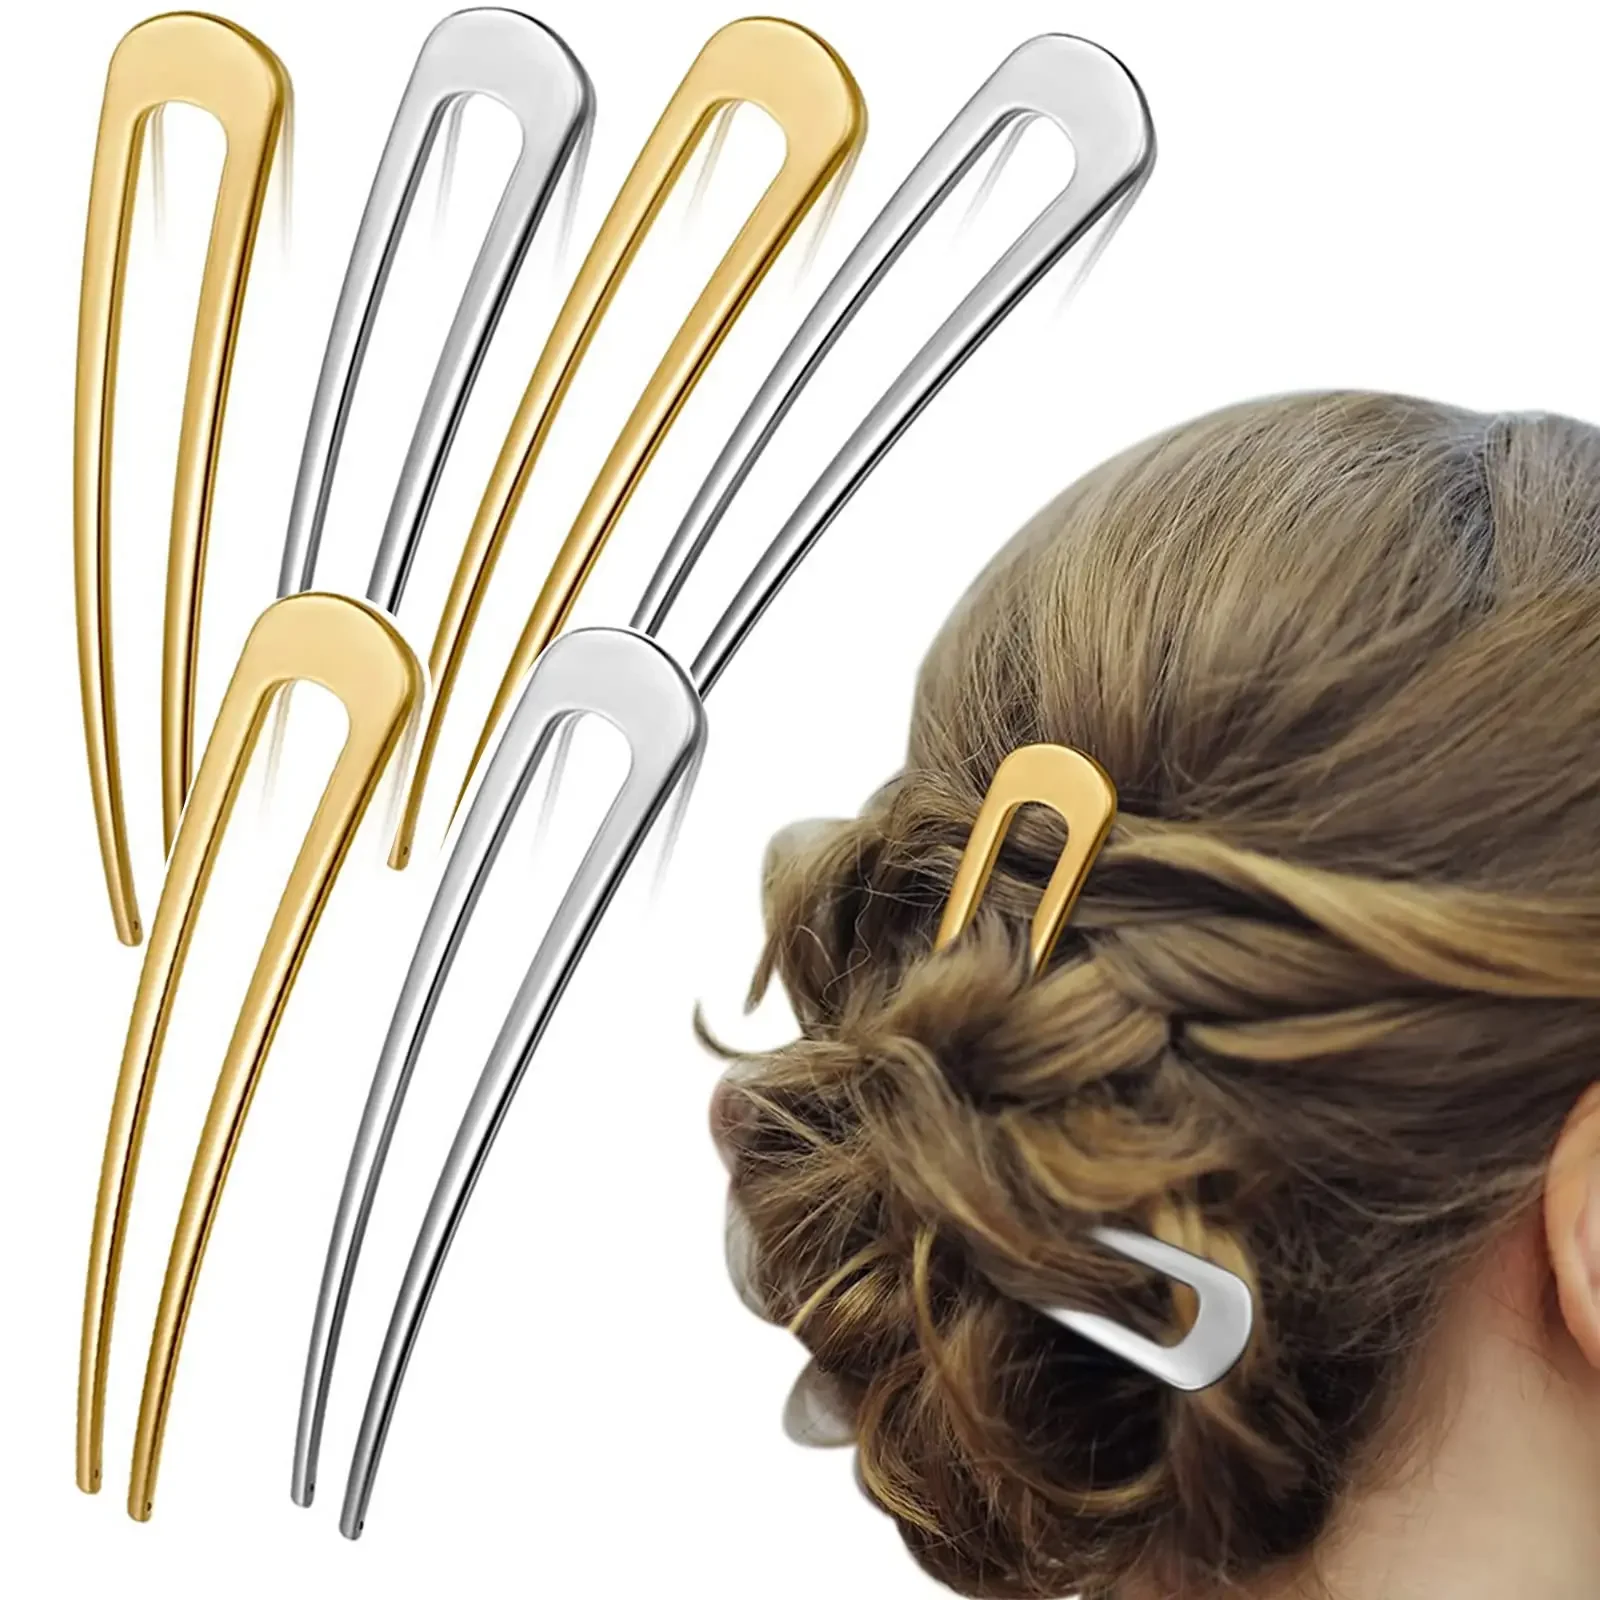 

U Shaped Hair Pins Hair Fork French Hair Pin 2 Prong Updo Chignon Forks Stick Hair Accessories for Women Girls